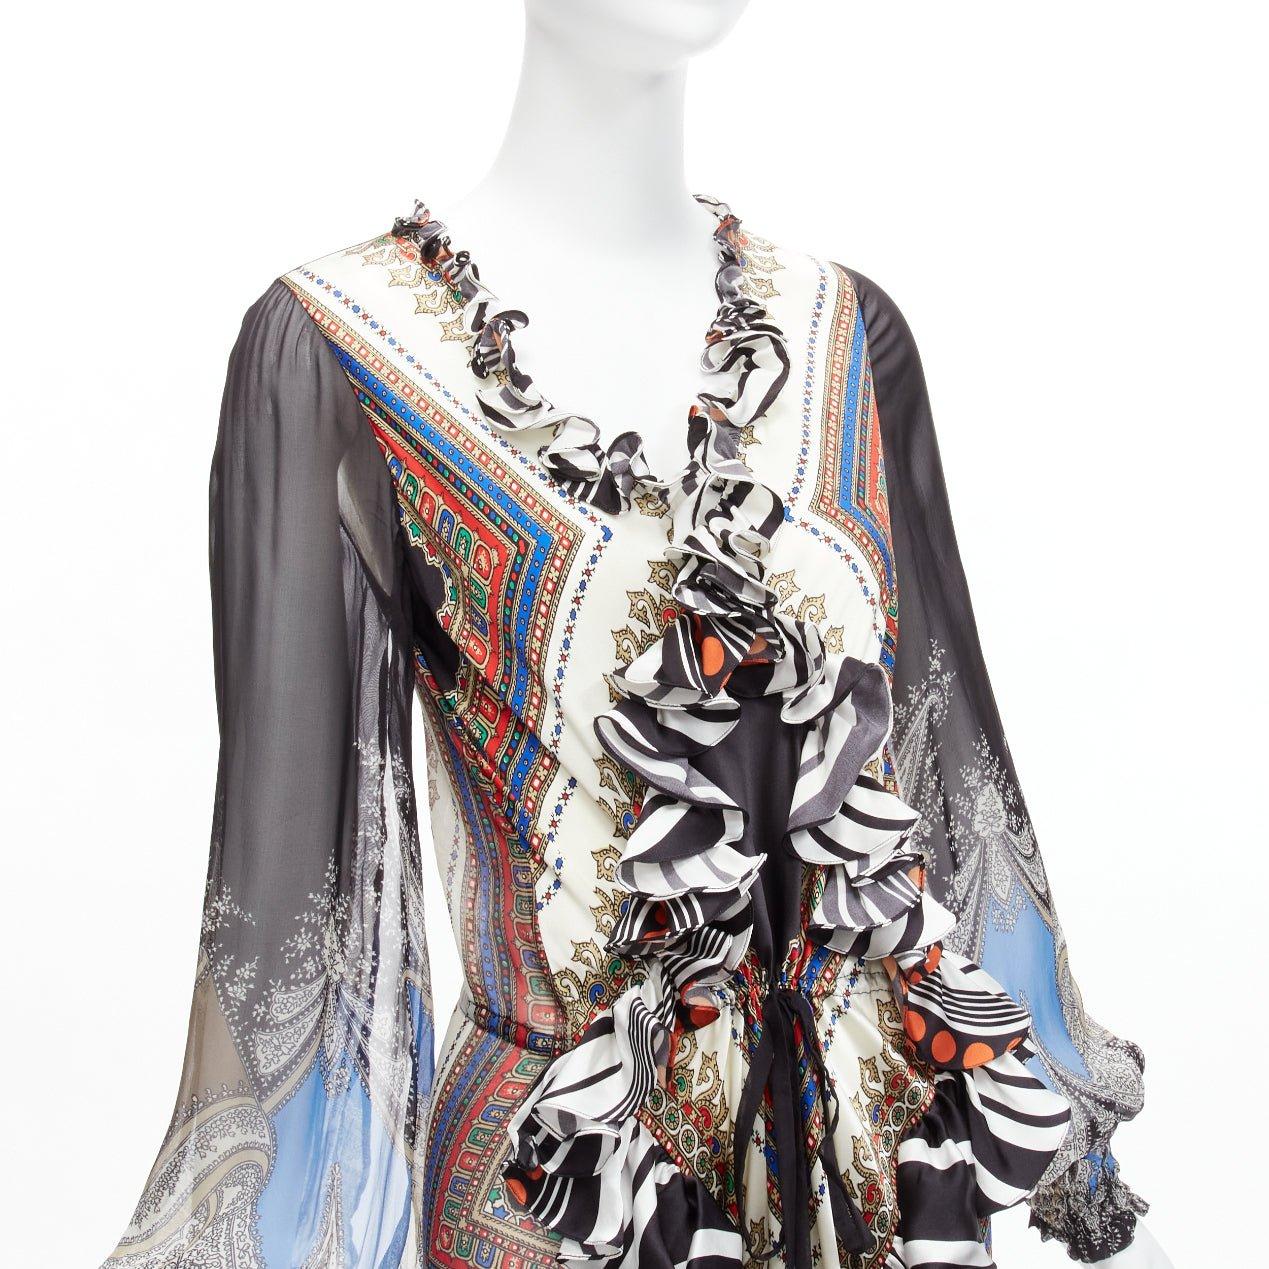 GIVENCHY RICCARDO TISCI 2013 Runway mixed print sheer ruffle gown dress FR38 M For Sale 2